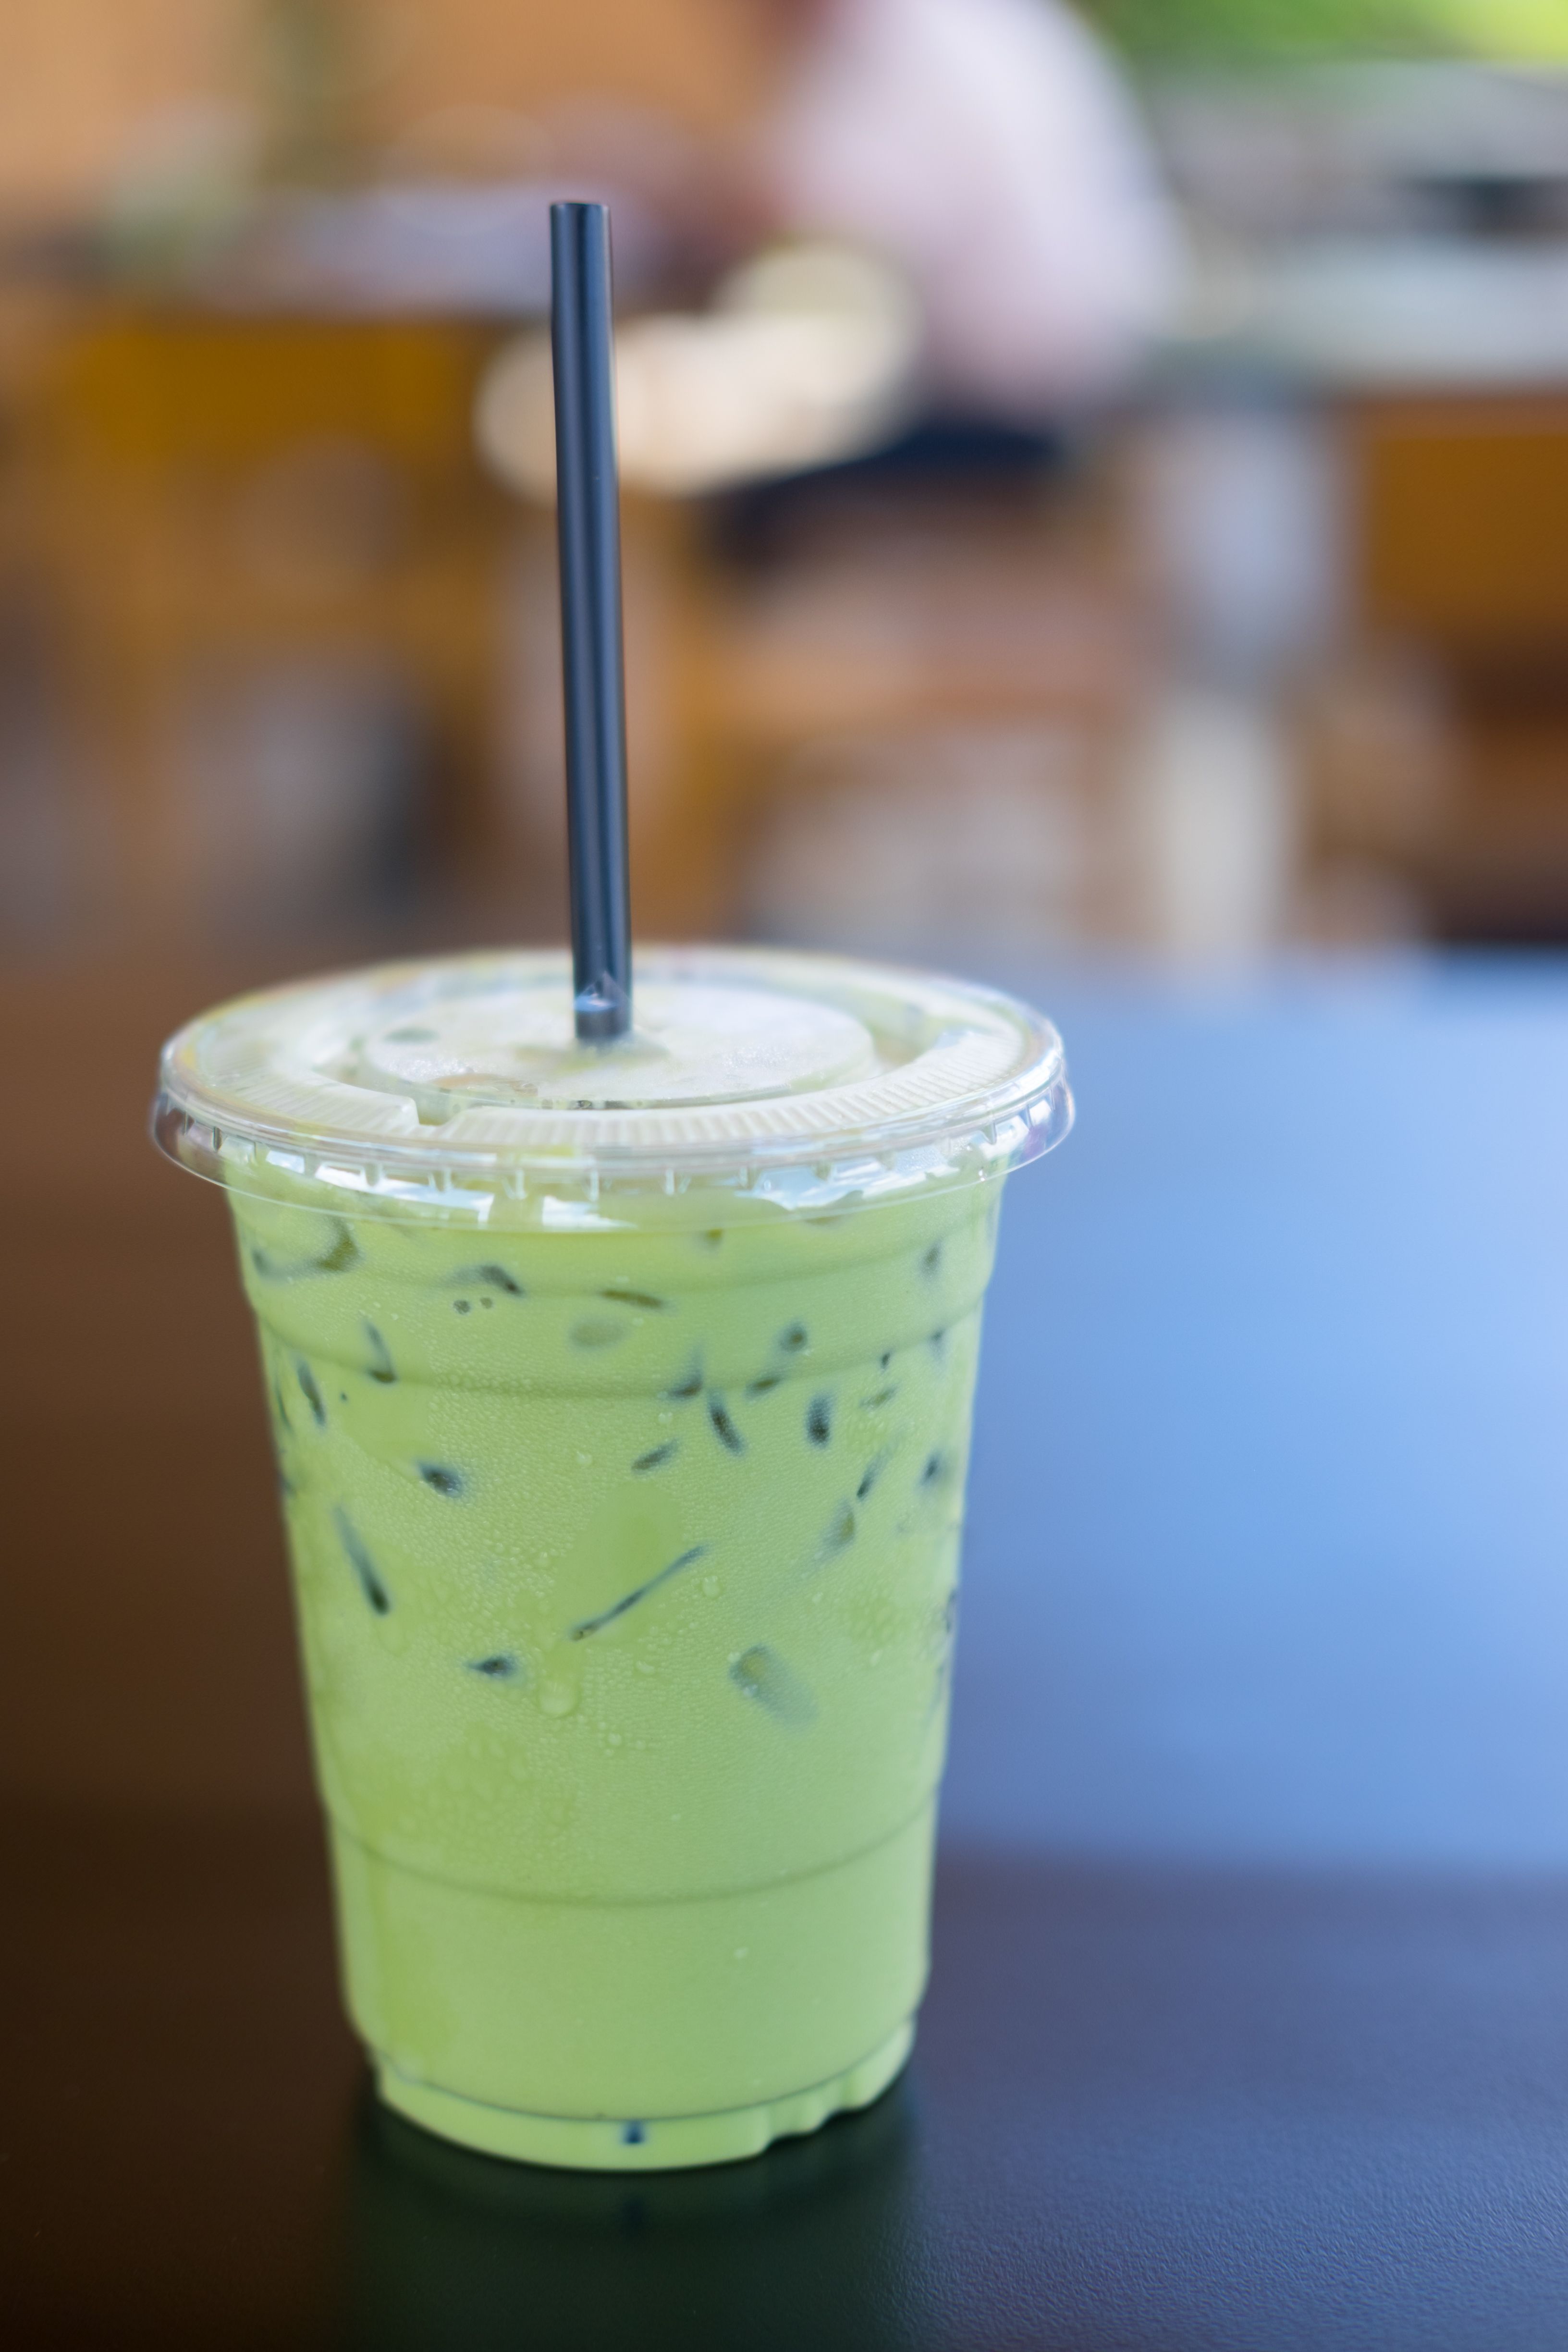 https://hips.hearstapps.com/hmg-prod/images/iced-green-tea-with-green-drinking-straw-in-a-royalty-free-image-886711826-1560460418.jpg